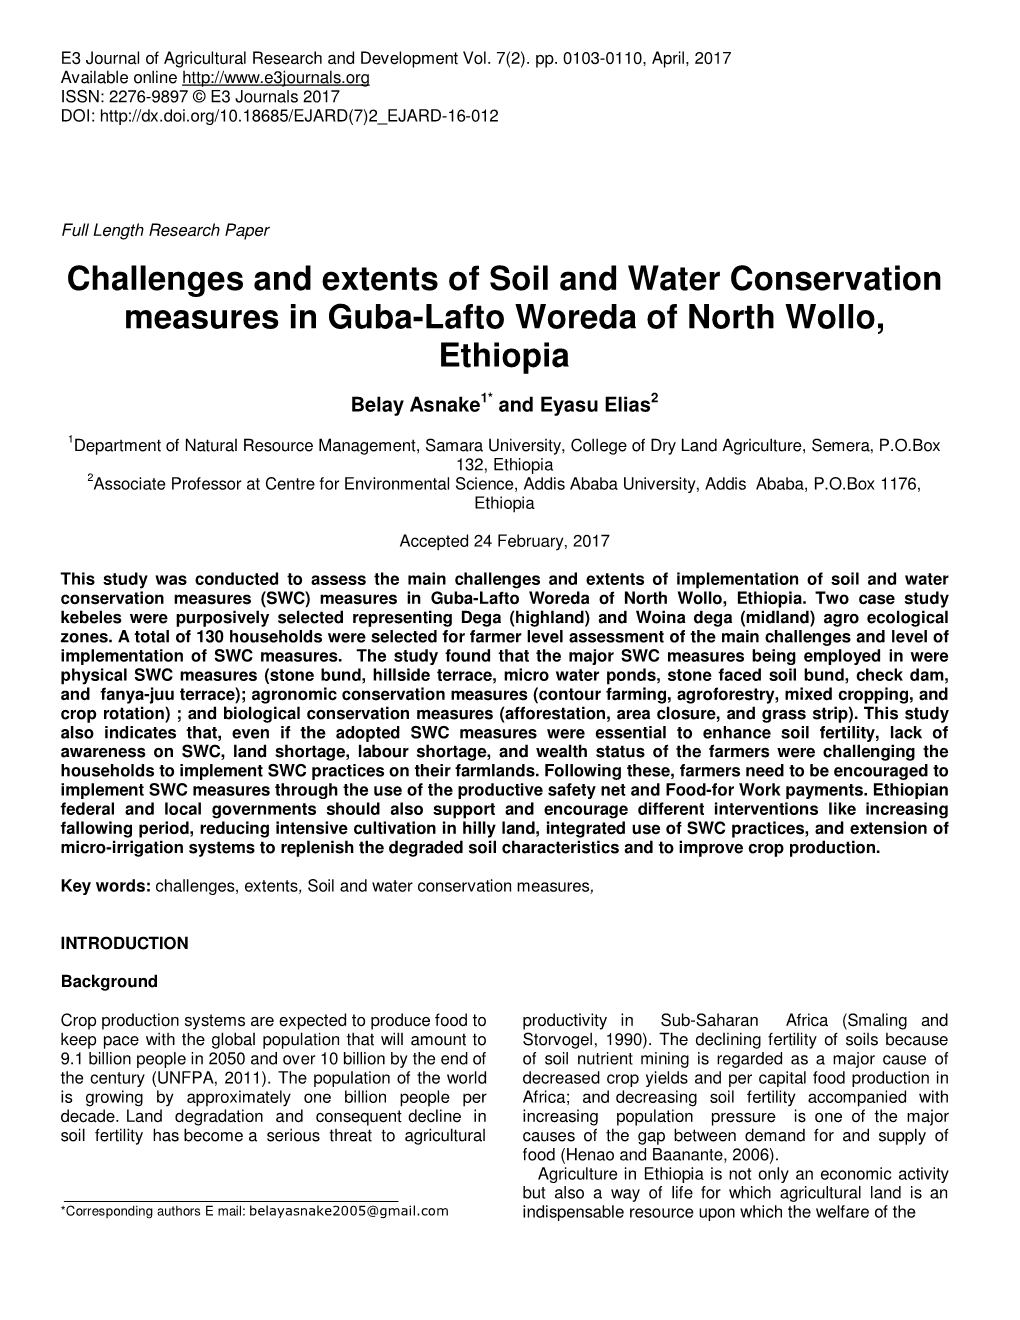 Challenges and Extents of Soil and Water Conservation Measures in Guba-Lafto Woreda of North Wollo, Ethiopia